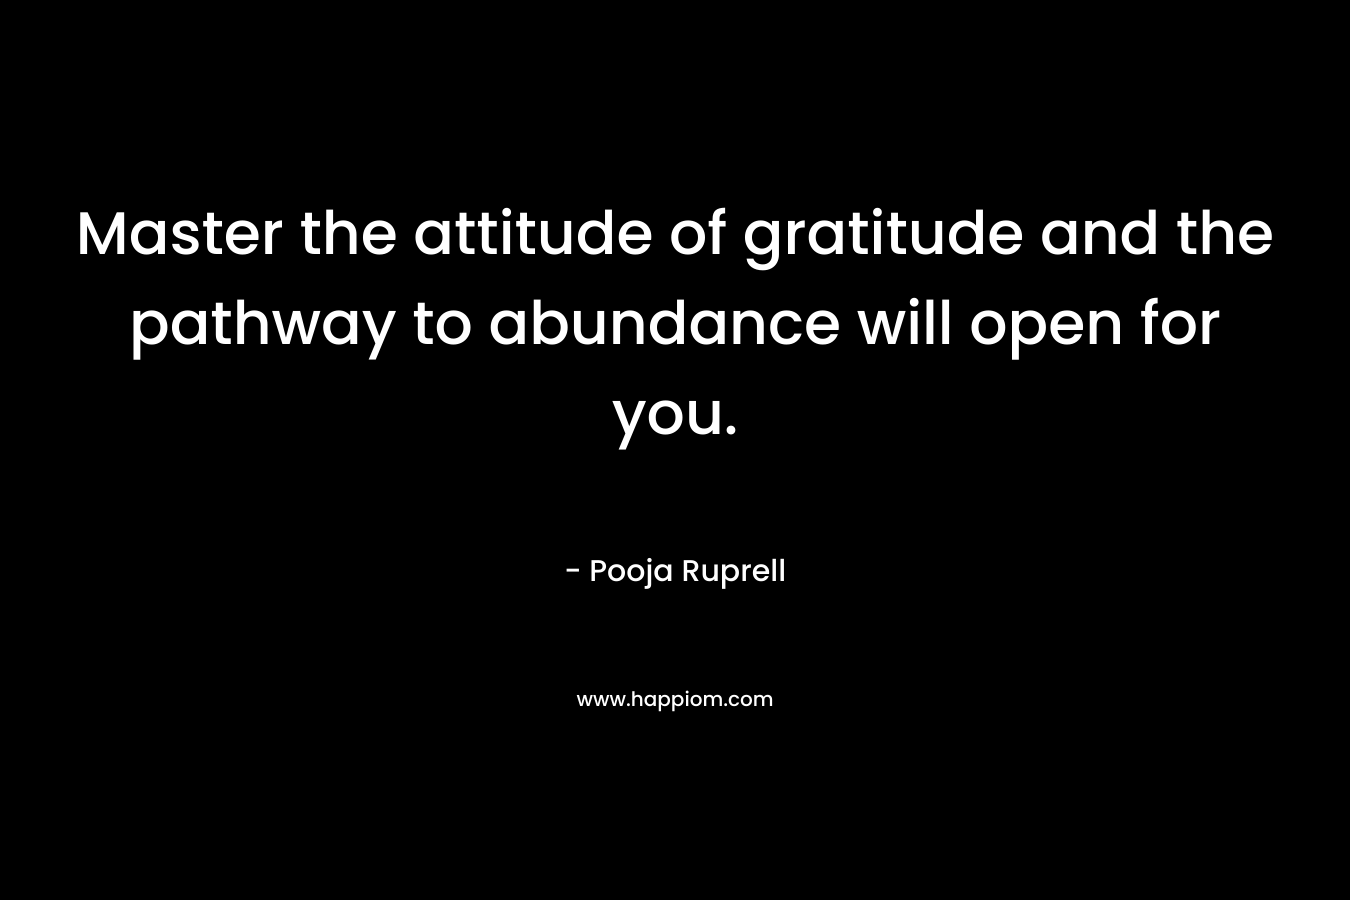 Master the attitude of gratitude and the pathway to abundance will open for you. – Pooja Ruprell